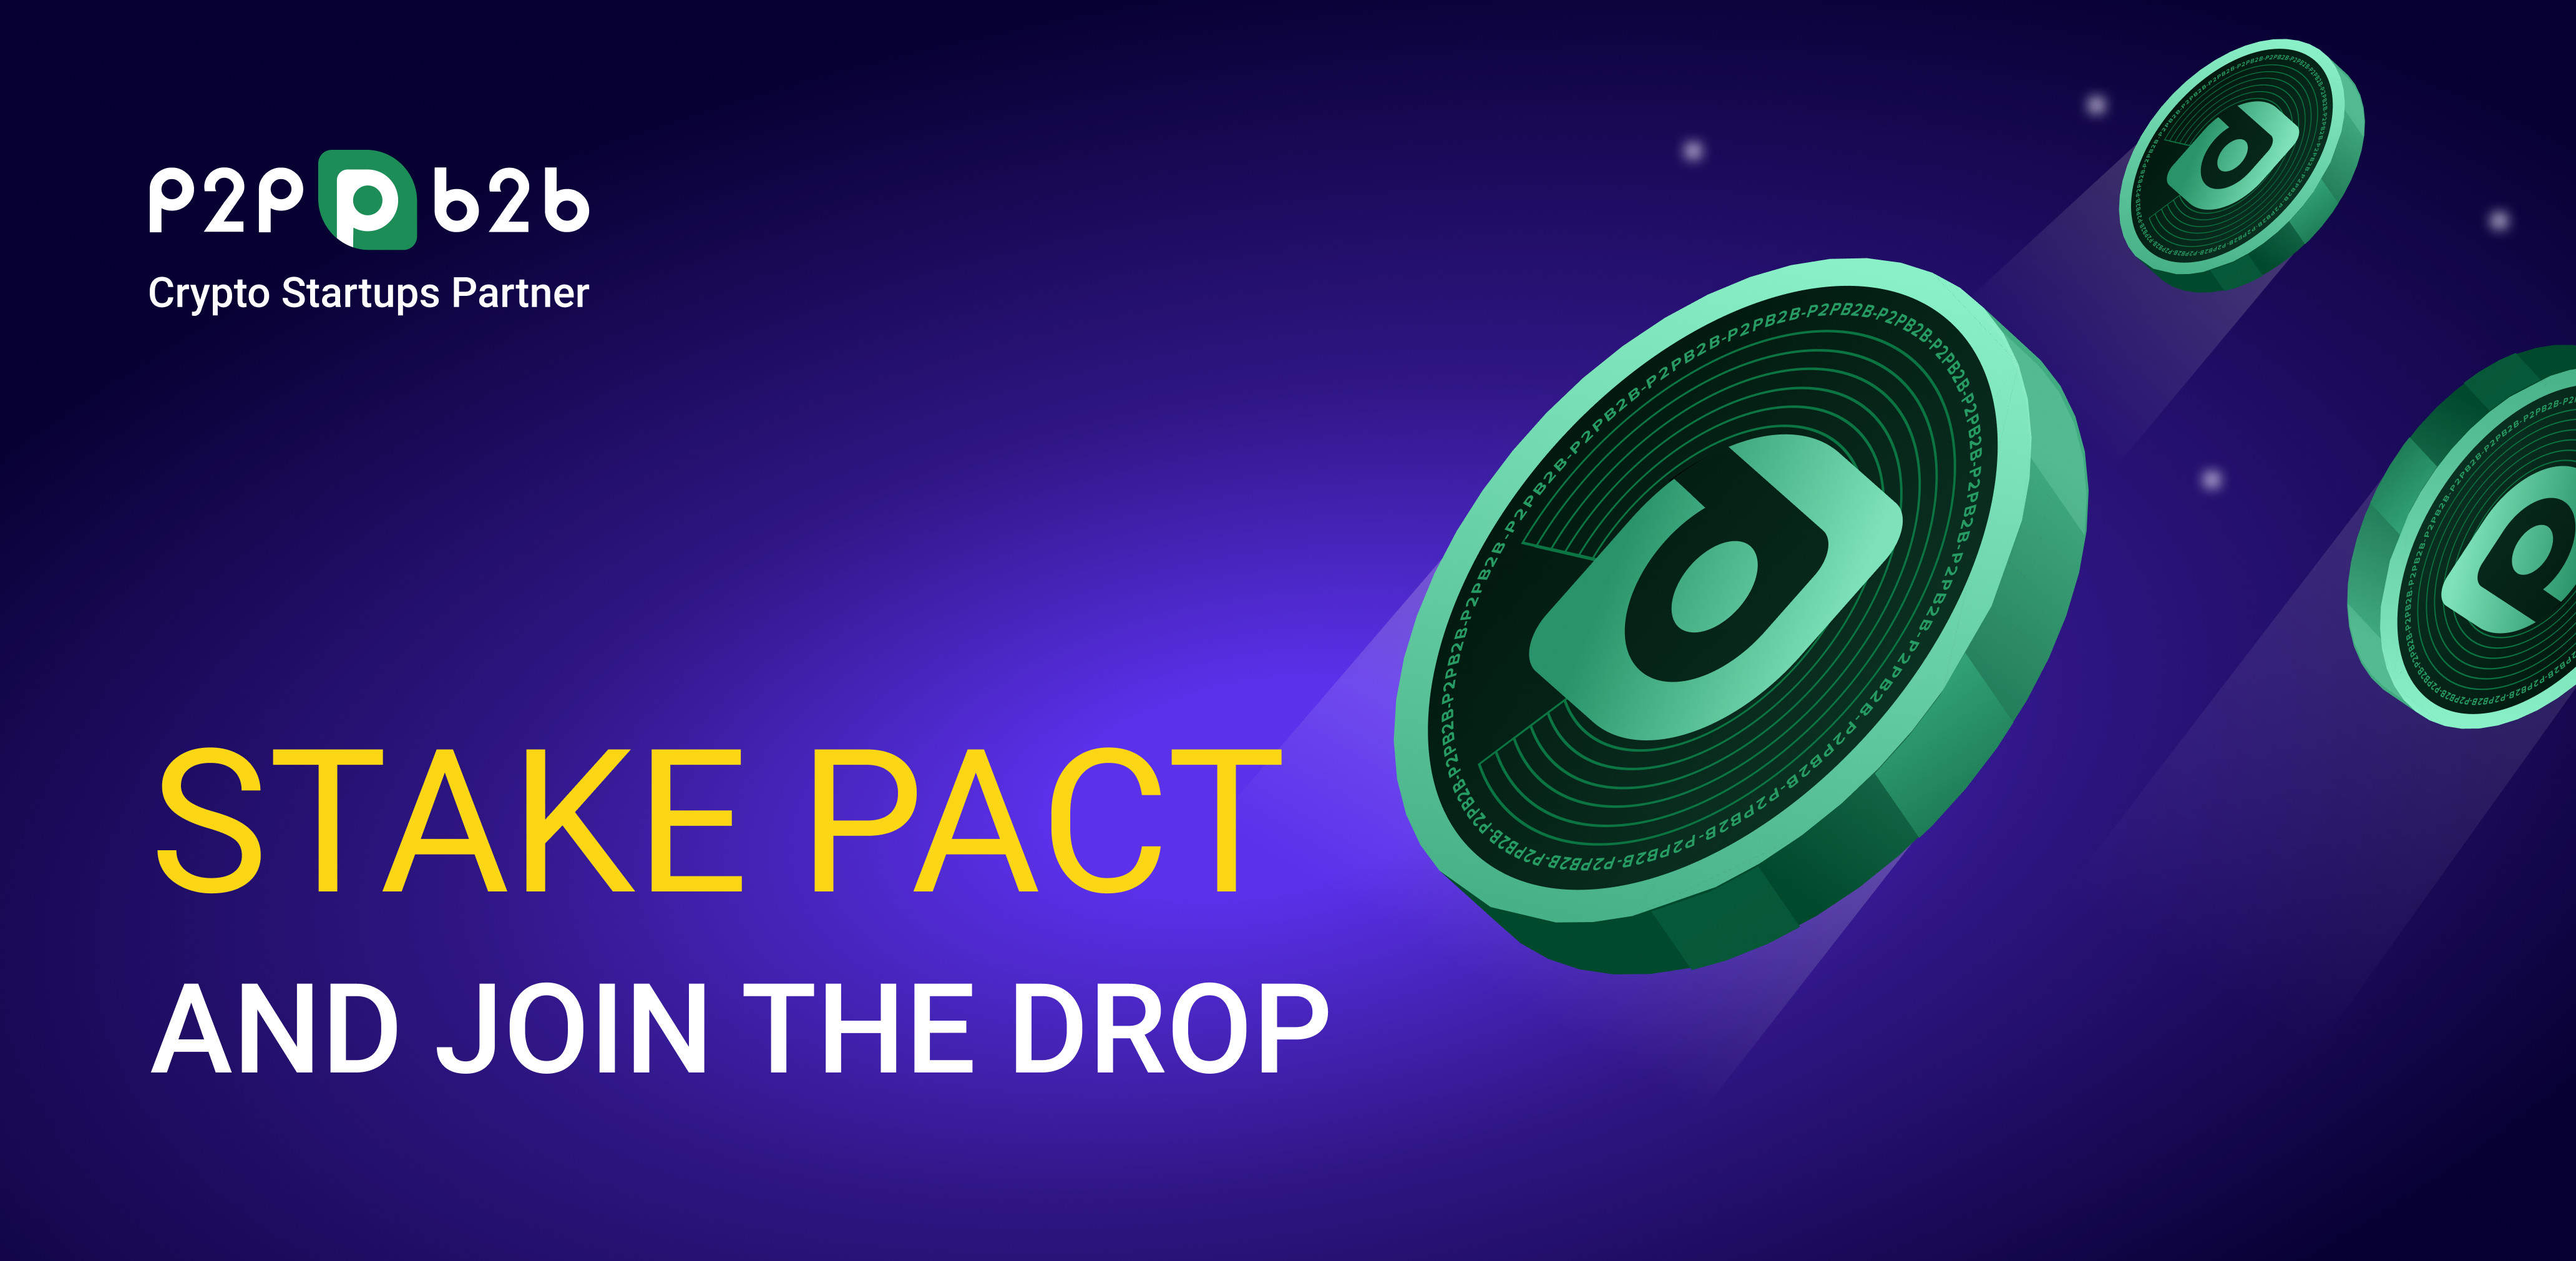 New Giveaway for PACT Token Holders to be Twice as Big ...